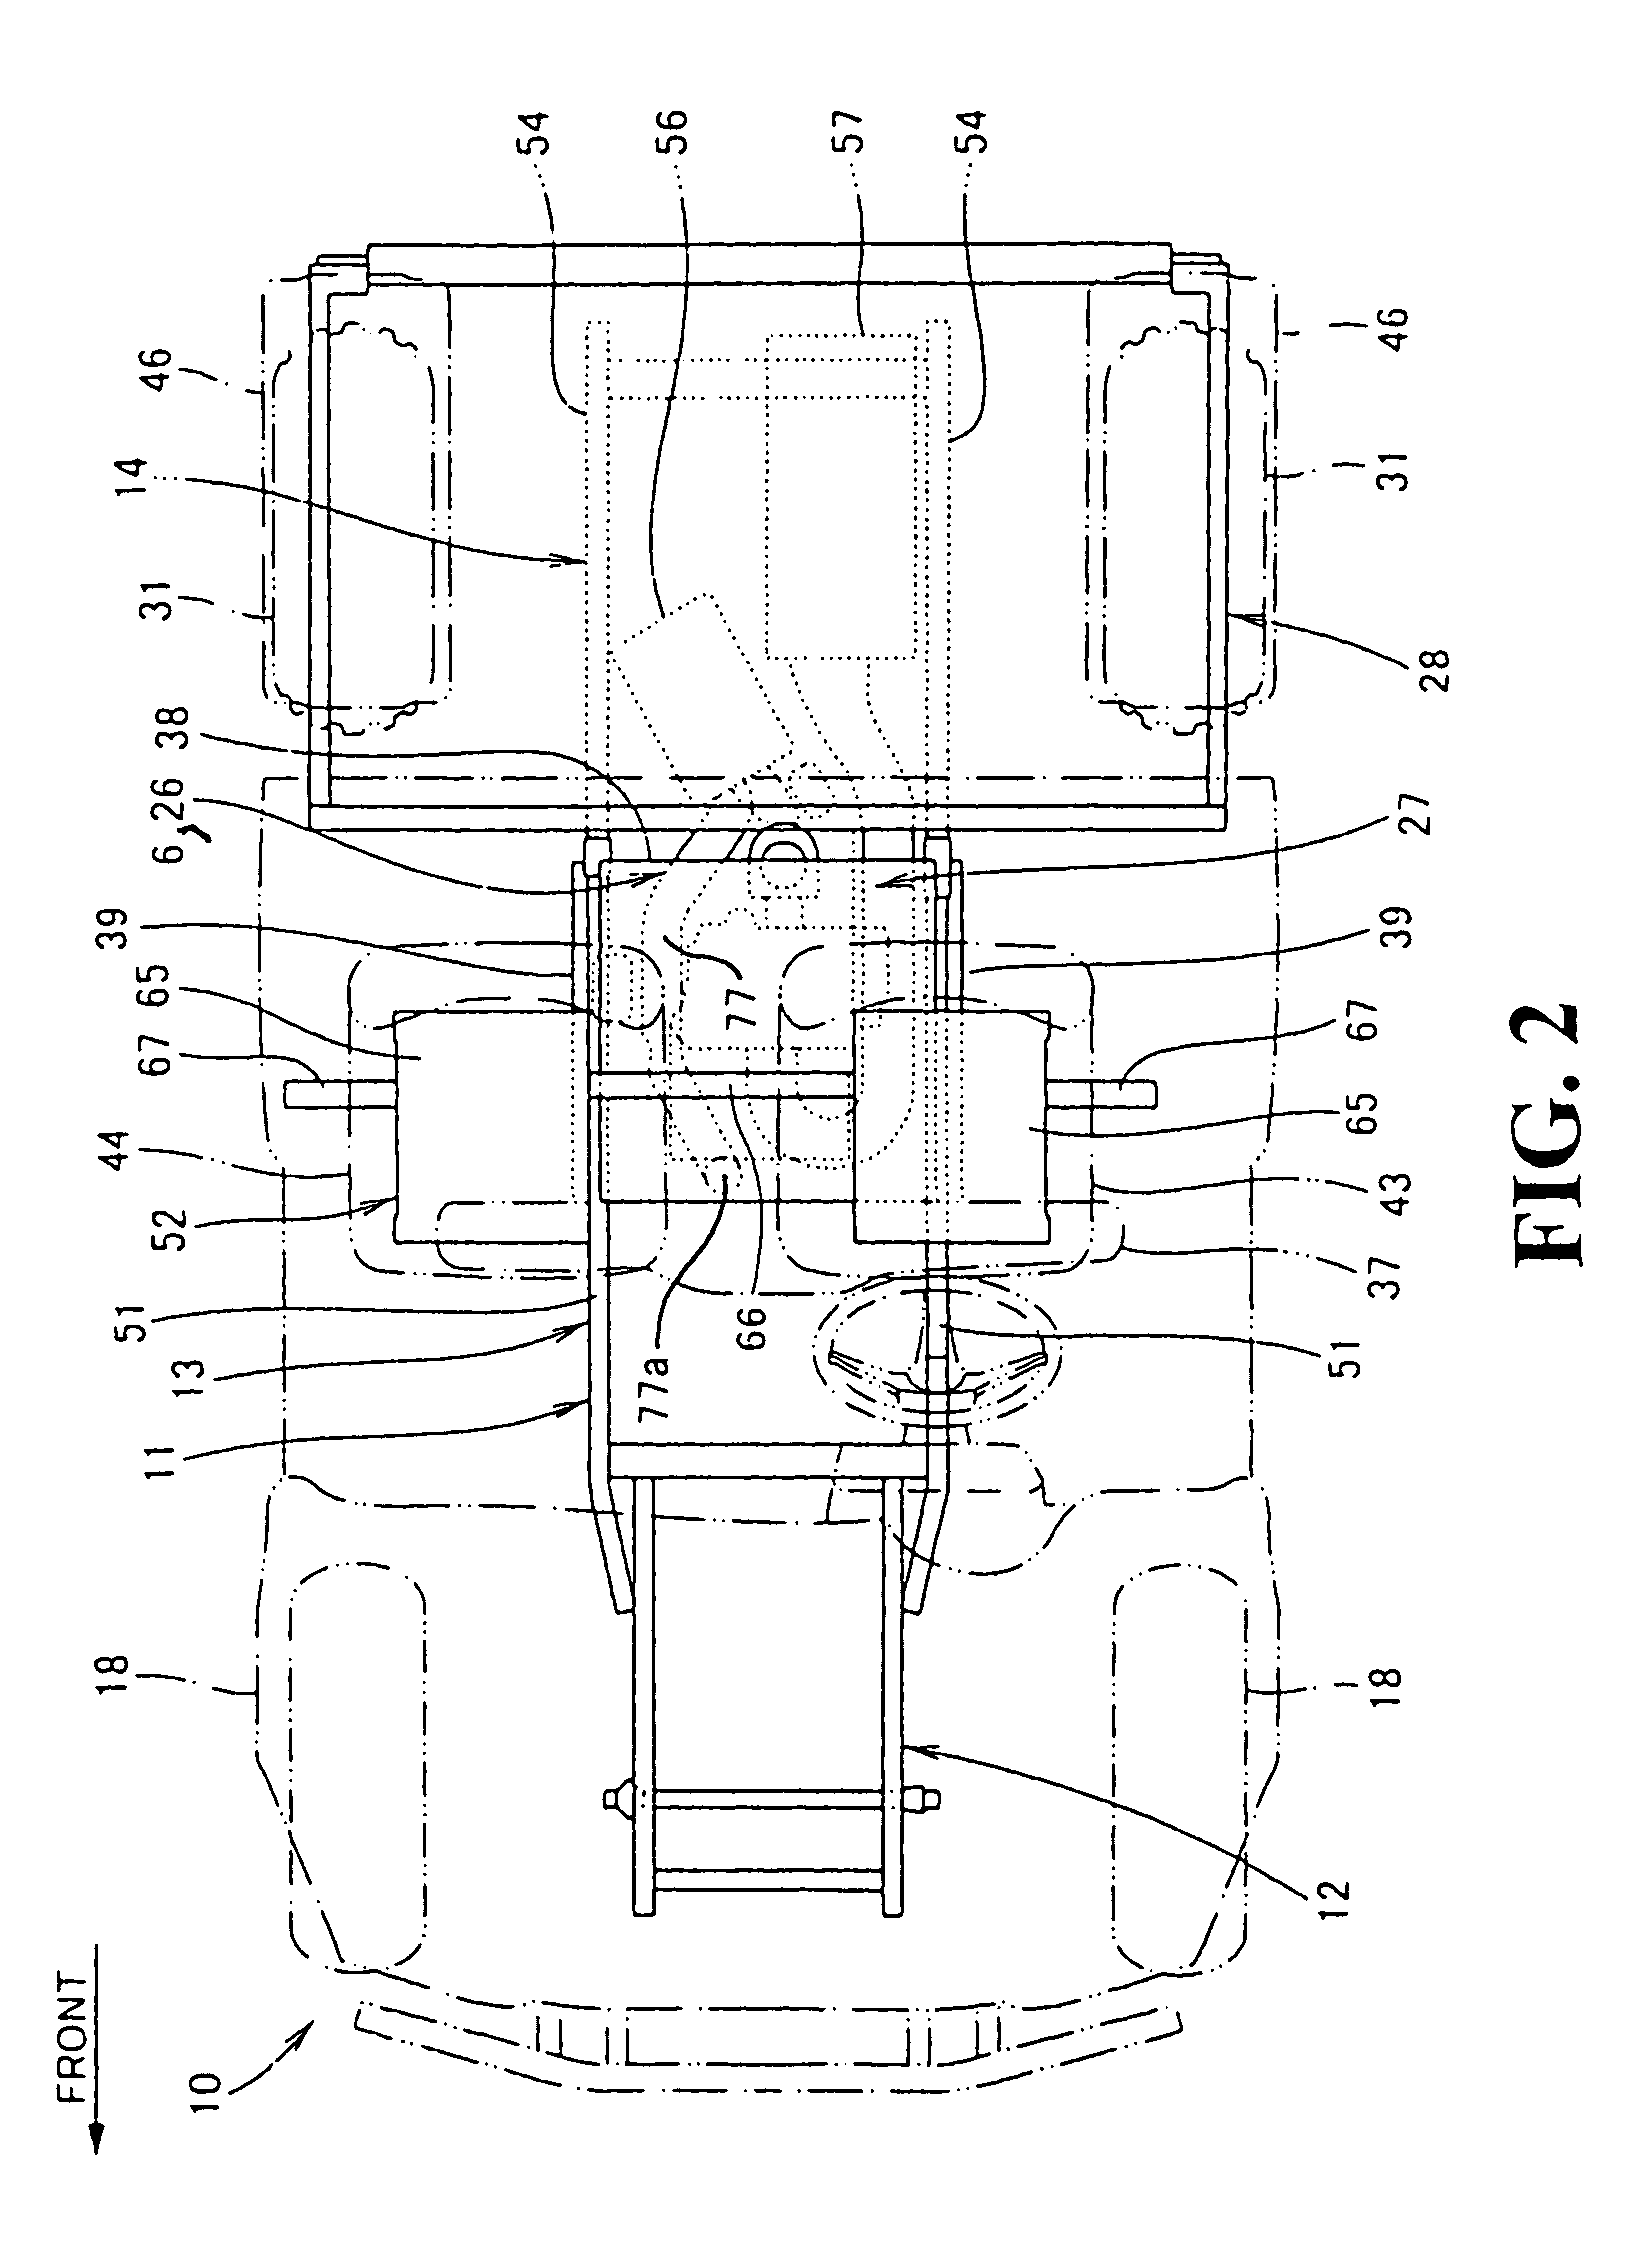 Air cleaner device in vehicle